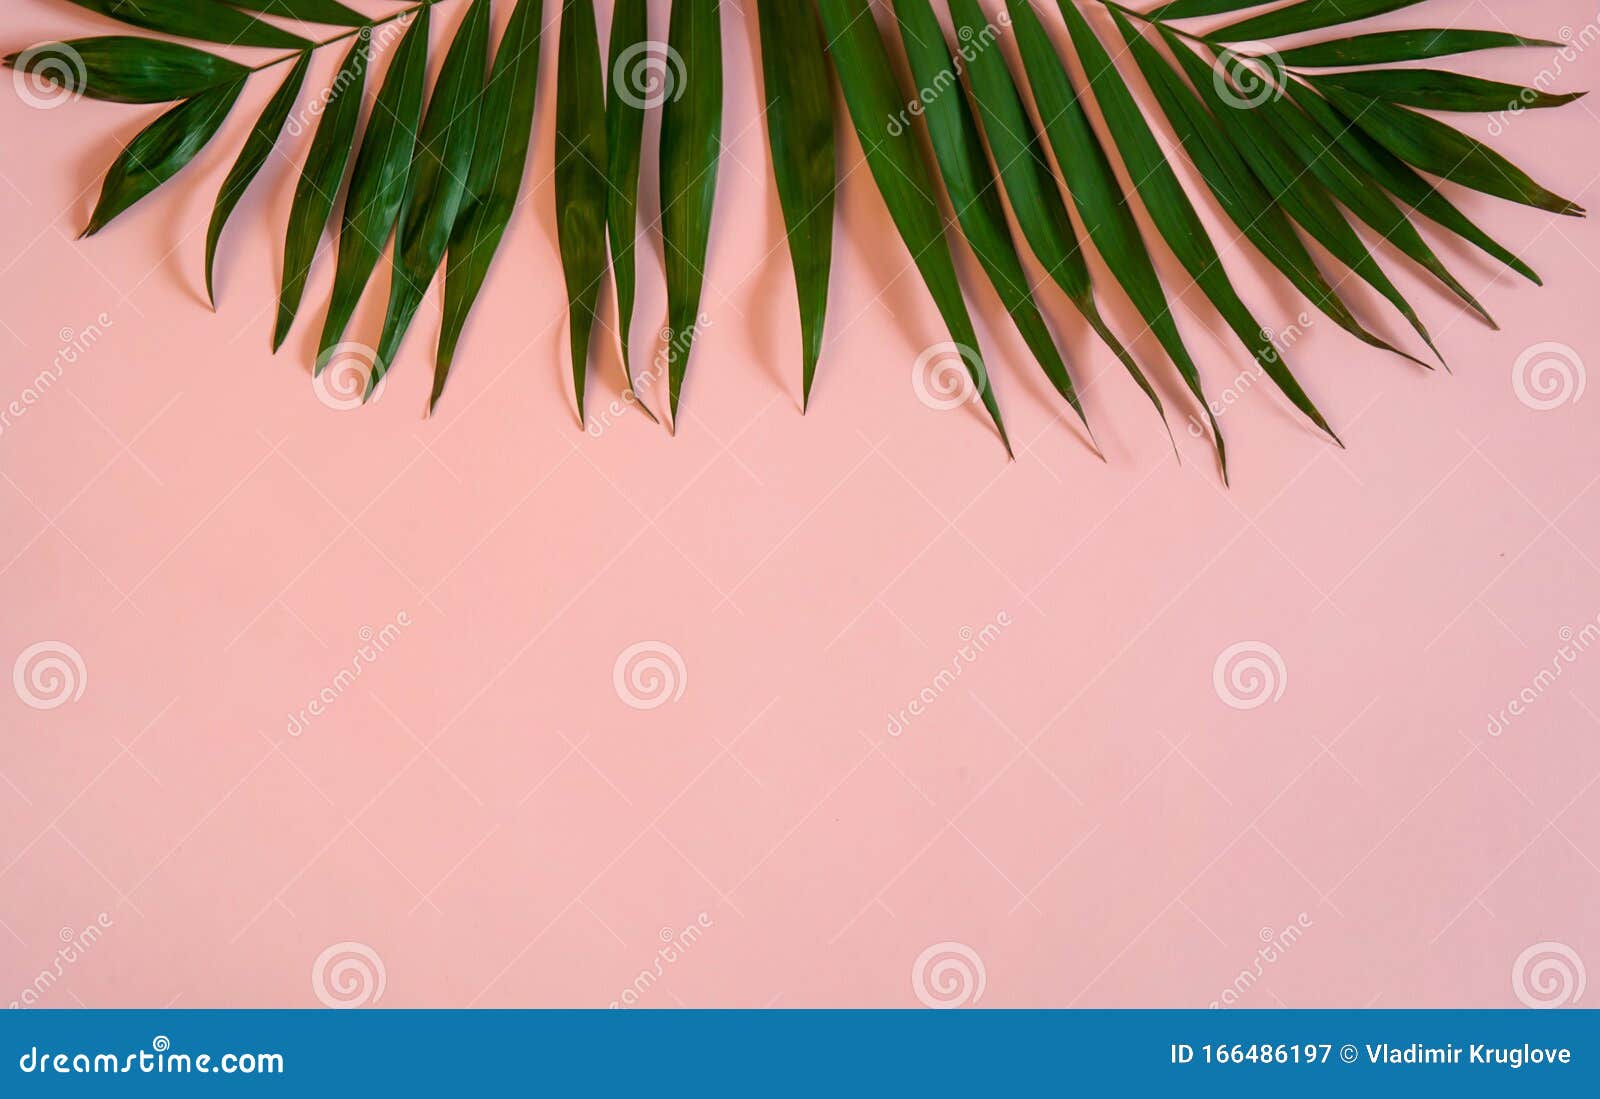 Tropical Green Palm Leaves on Pink Background. Stock Image - Image of